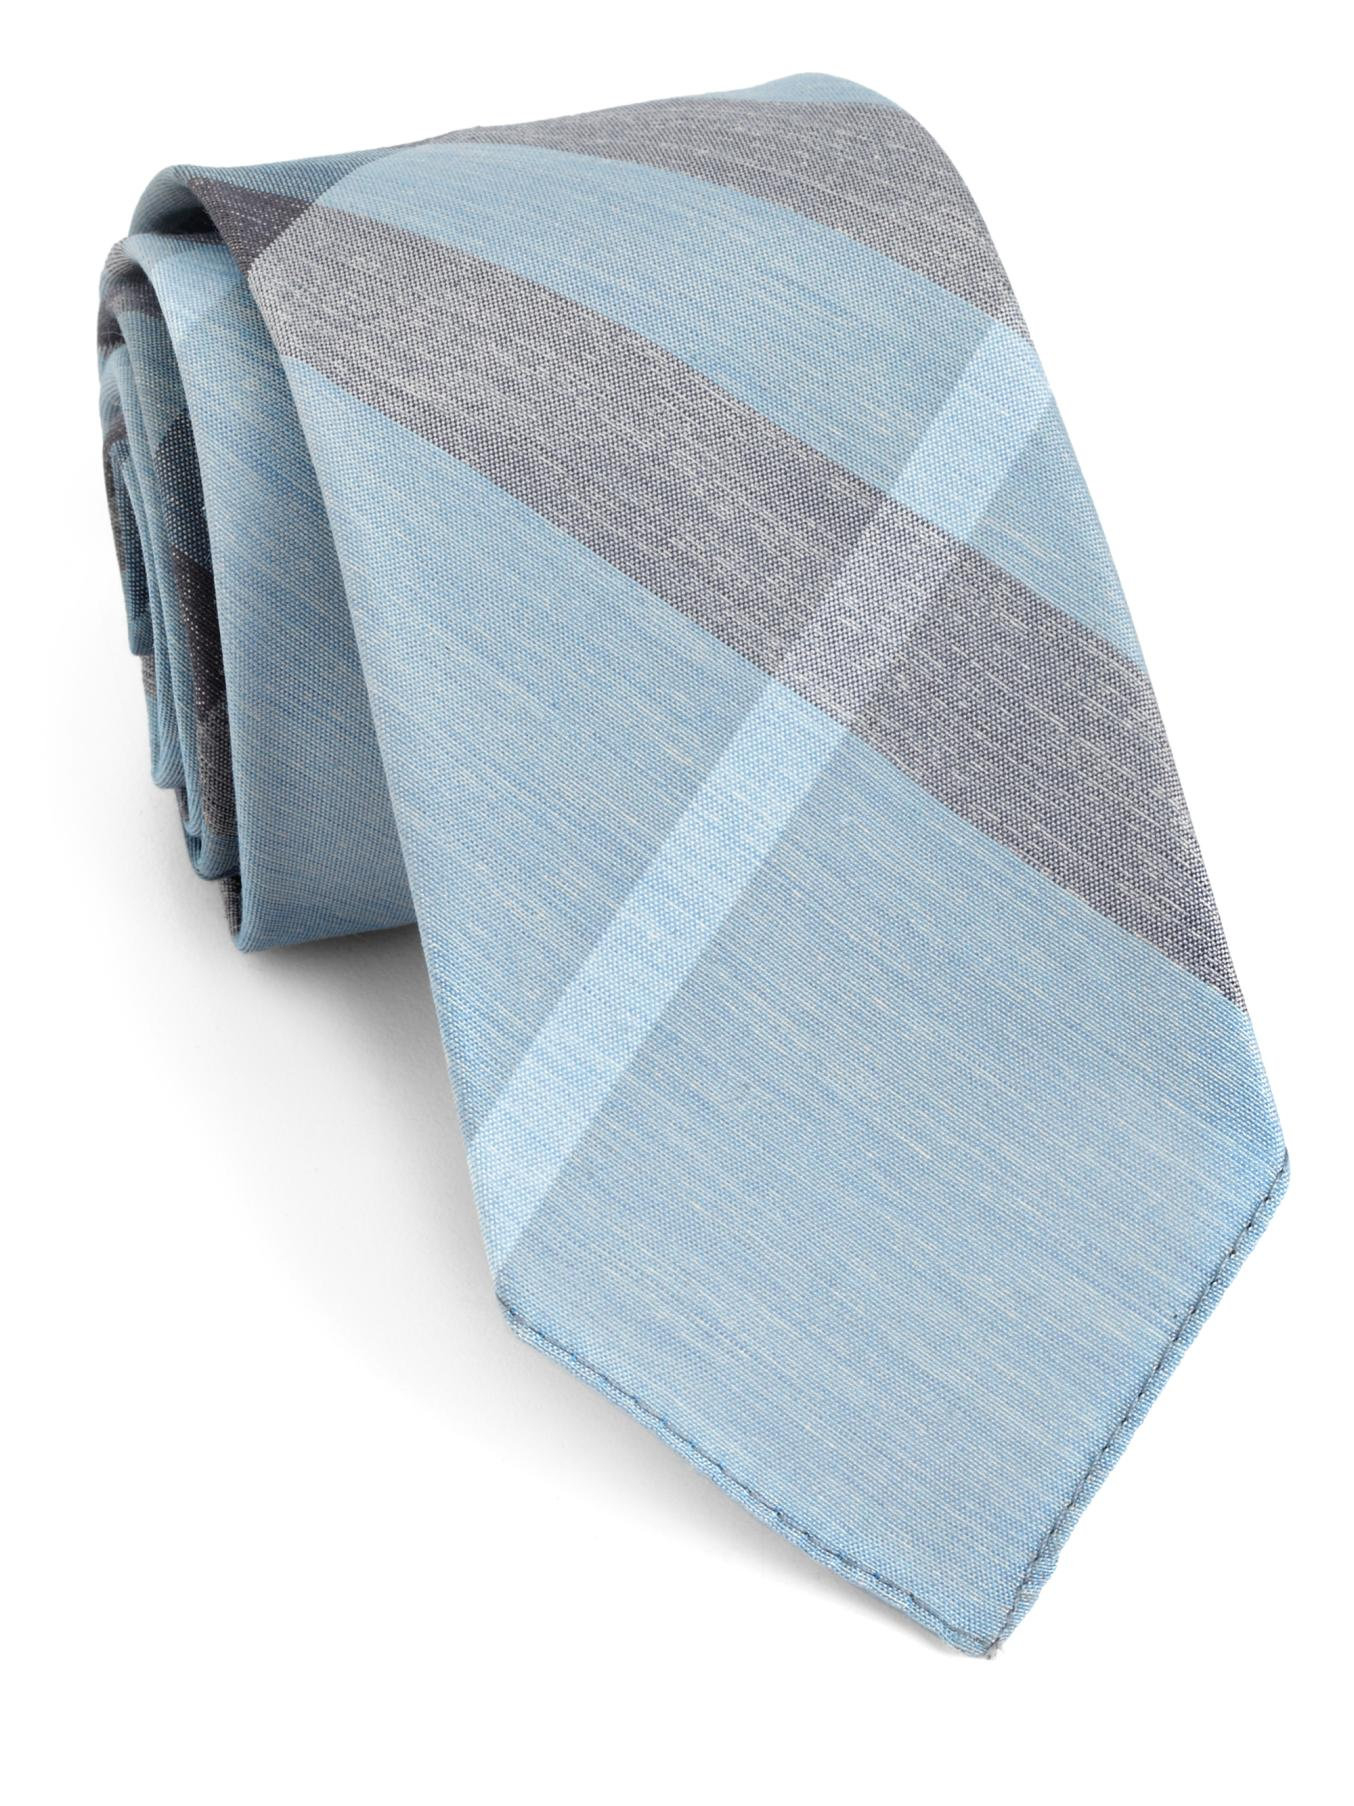 Burberry Textured Silk Check Tie in Light-Blue (Blue) for Men - Lyst